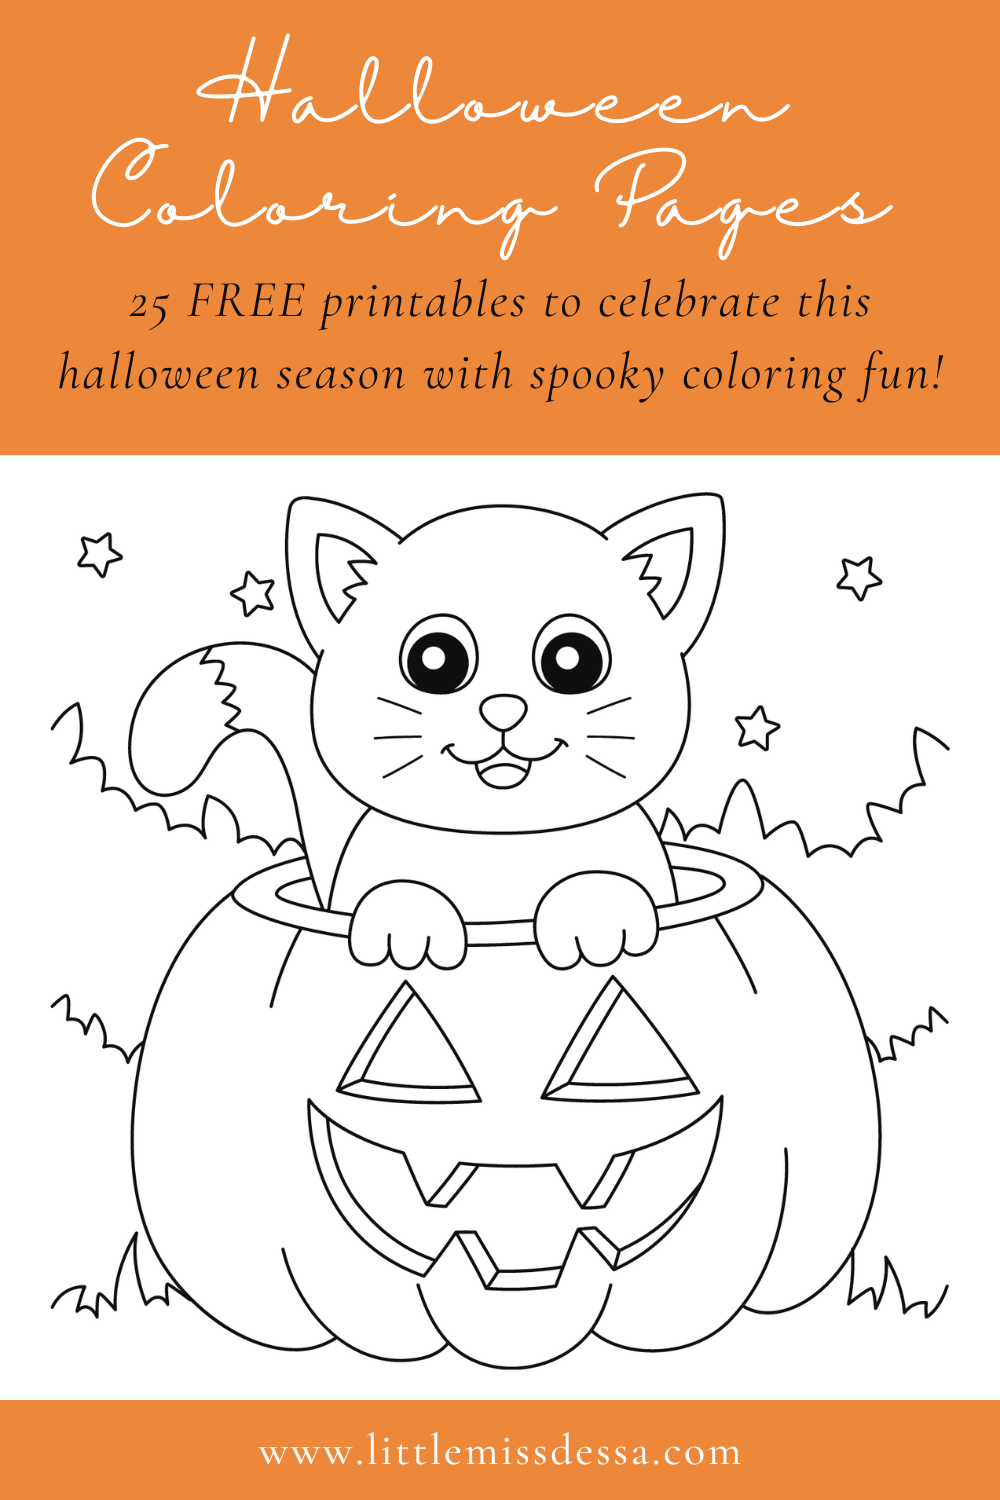 Halloween Fun: 25 Coloring Pages for your littles!